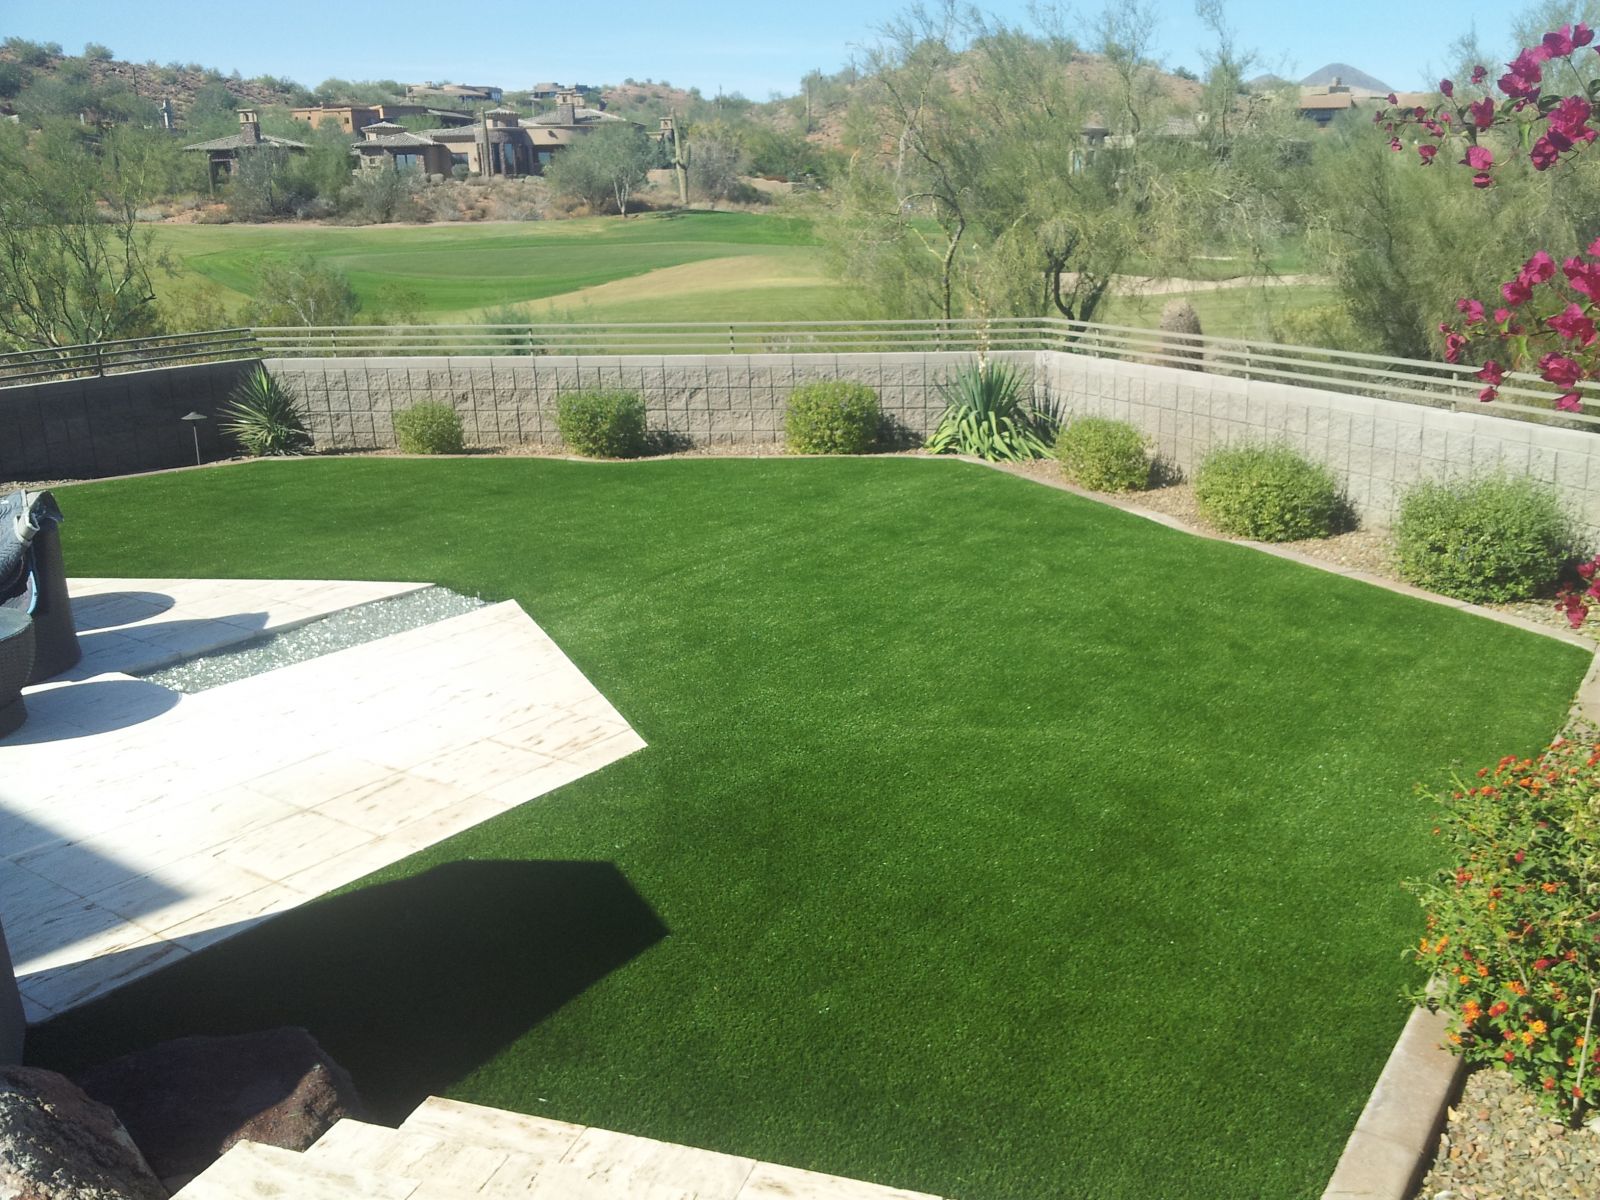 Yardscapes Using Artificial Turf. Queen Creek Fake Grass